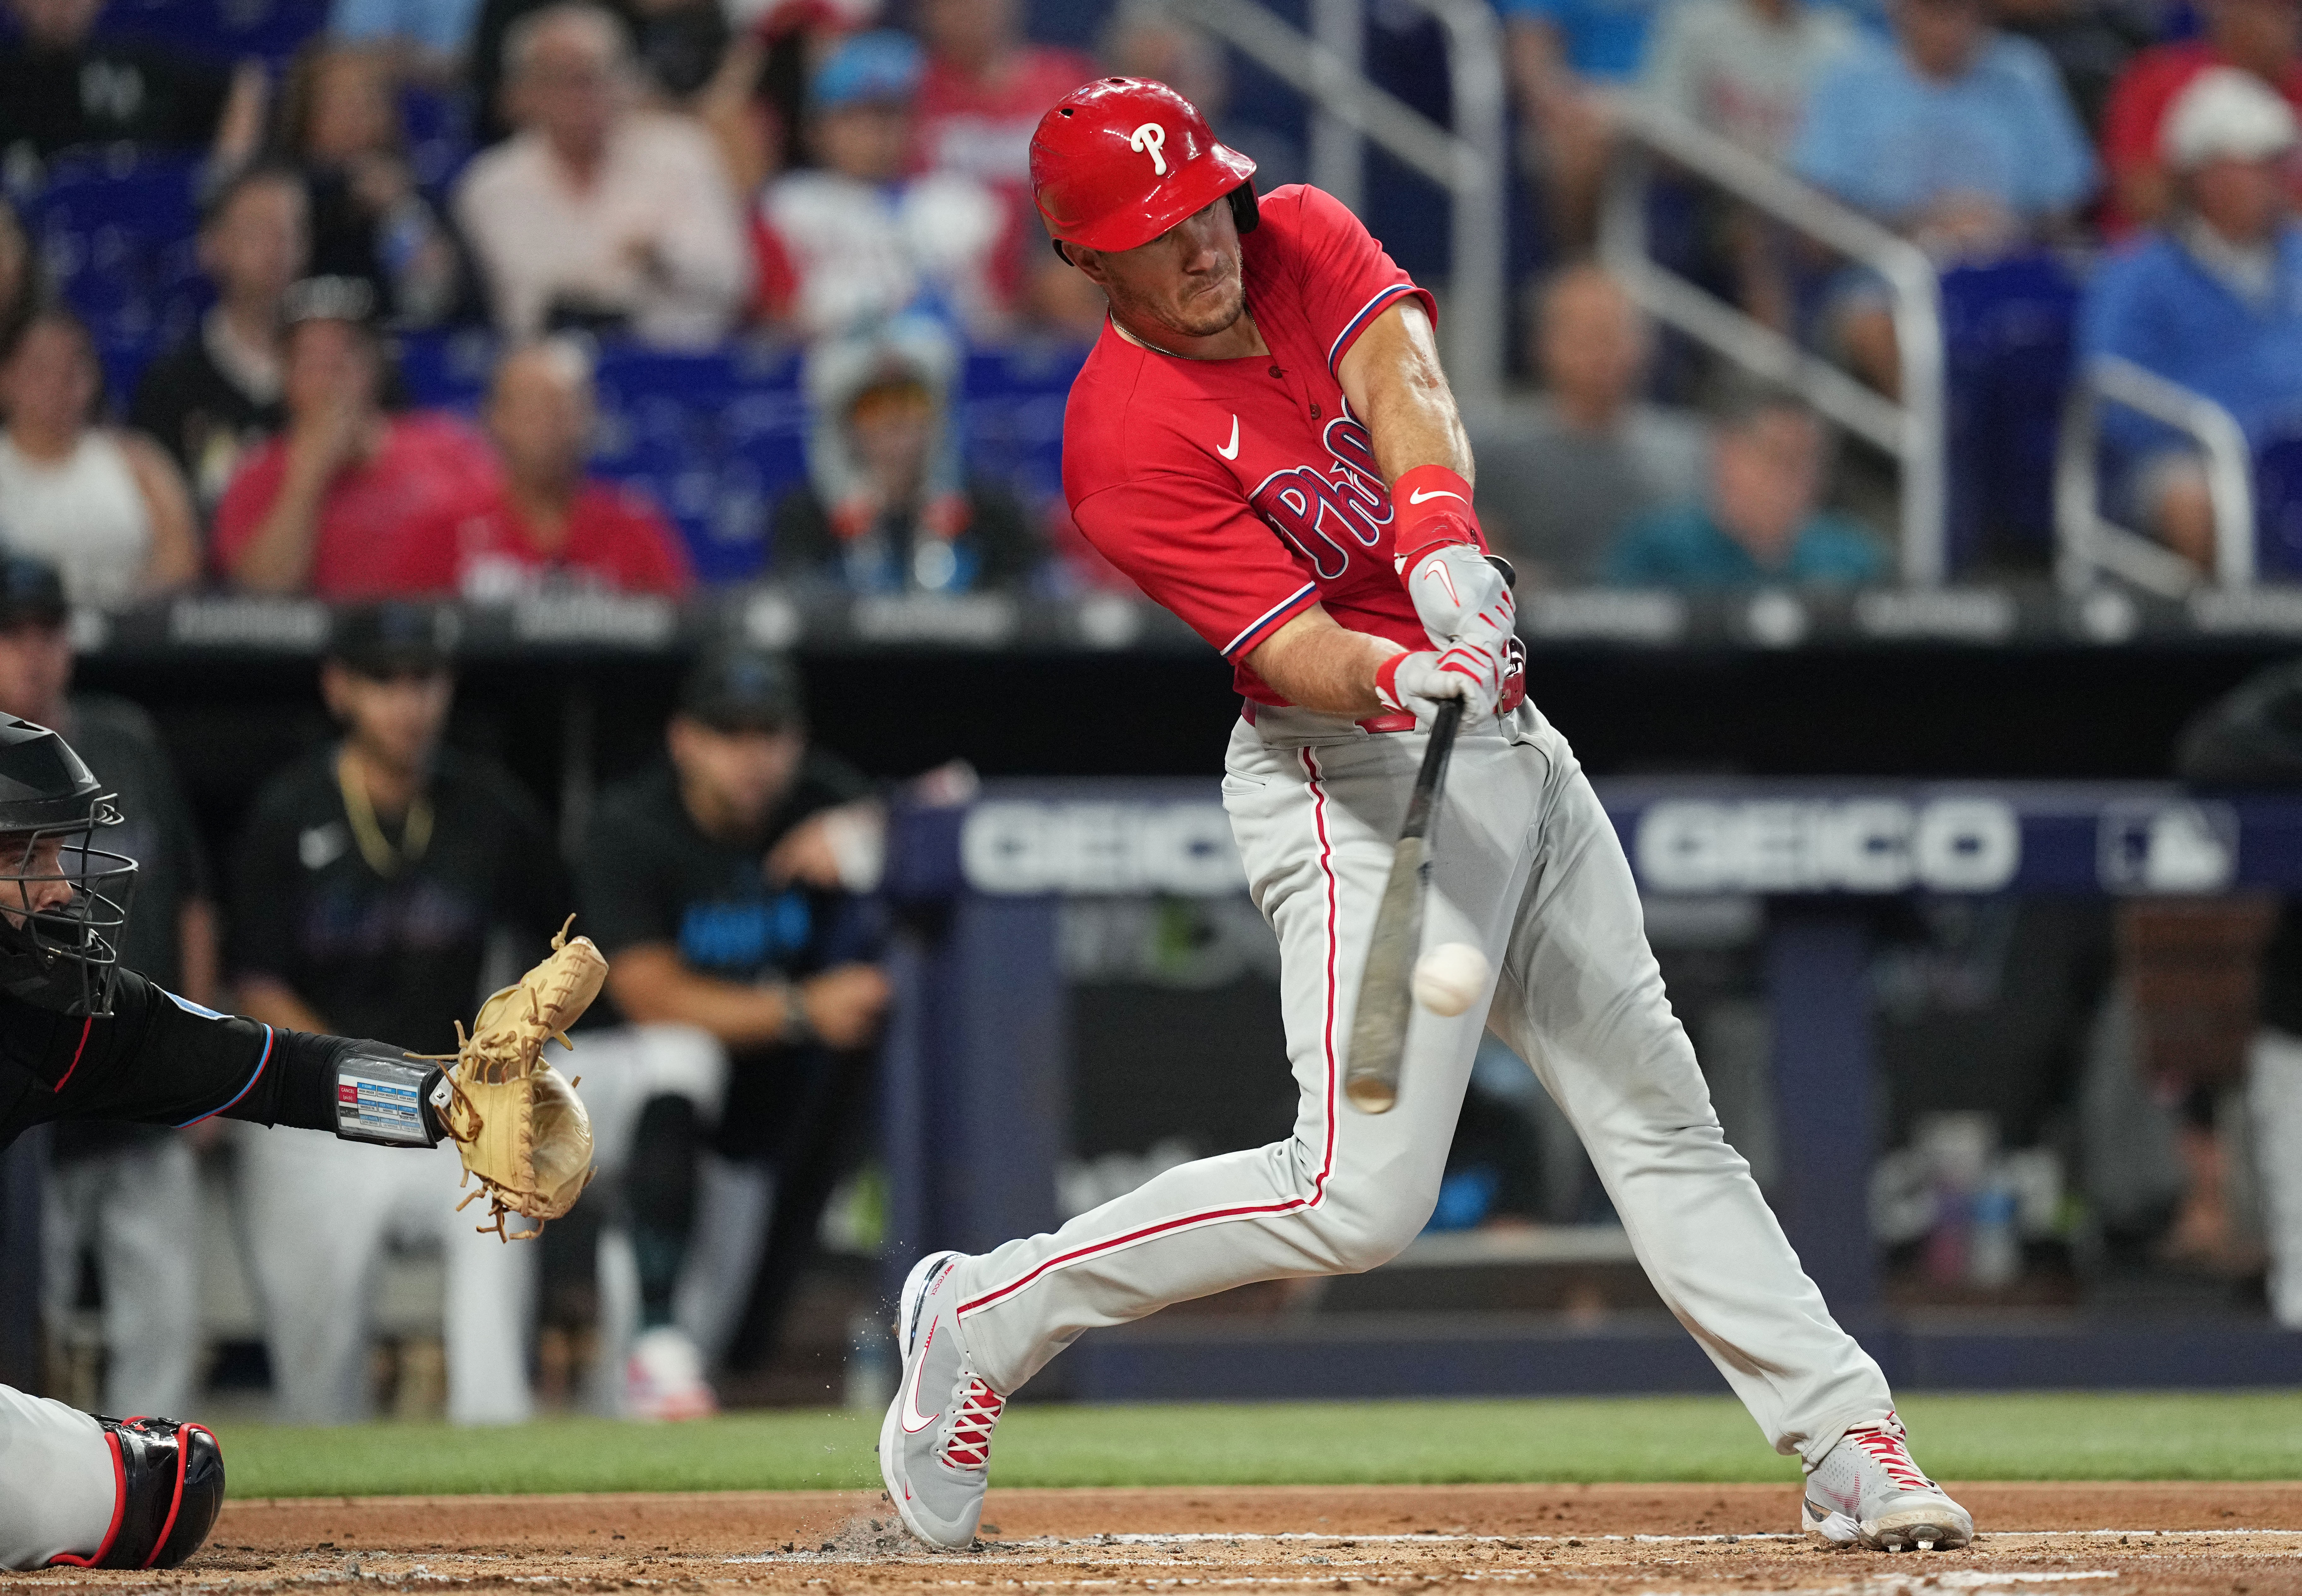 Lorenzen shuts down the Marlins in his Phillies debut. Realmuto homers in  4-2 win